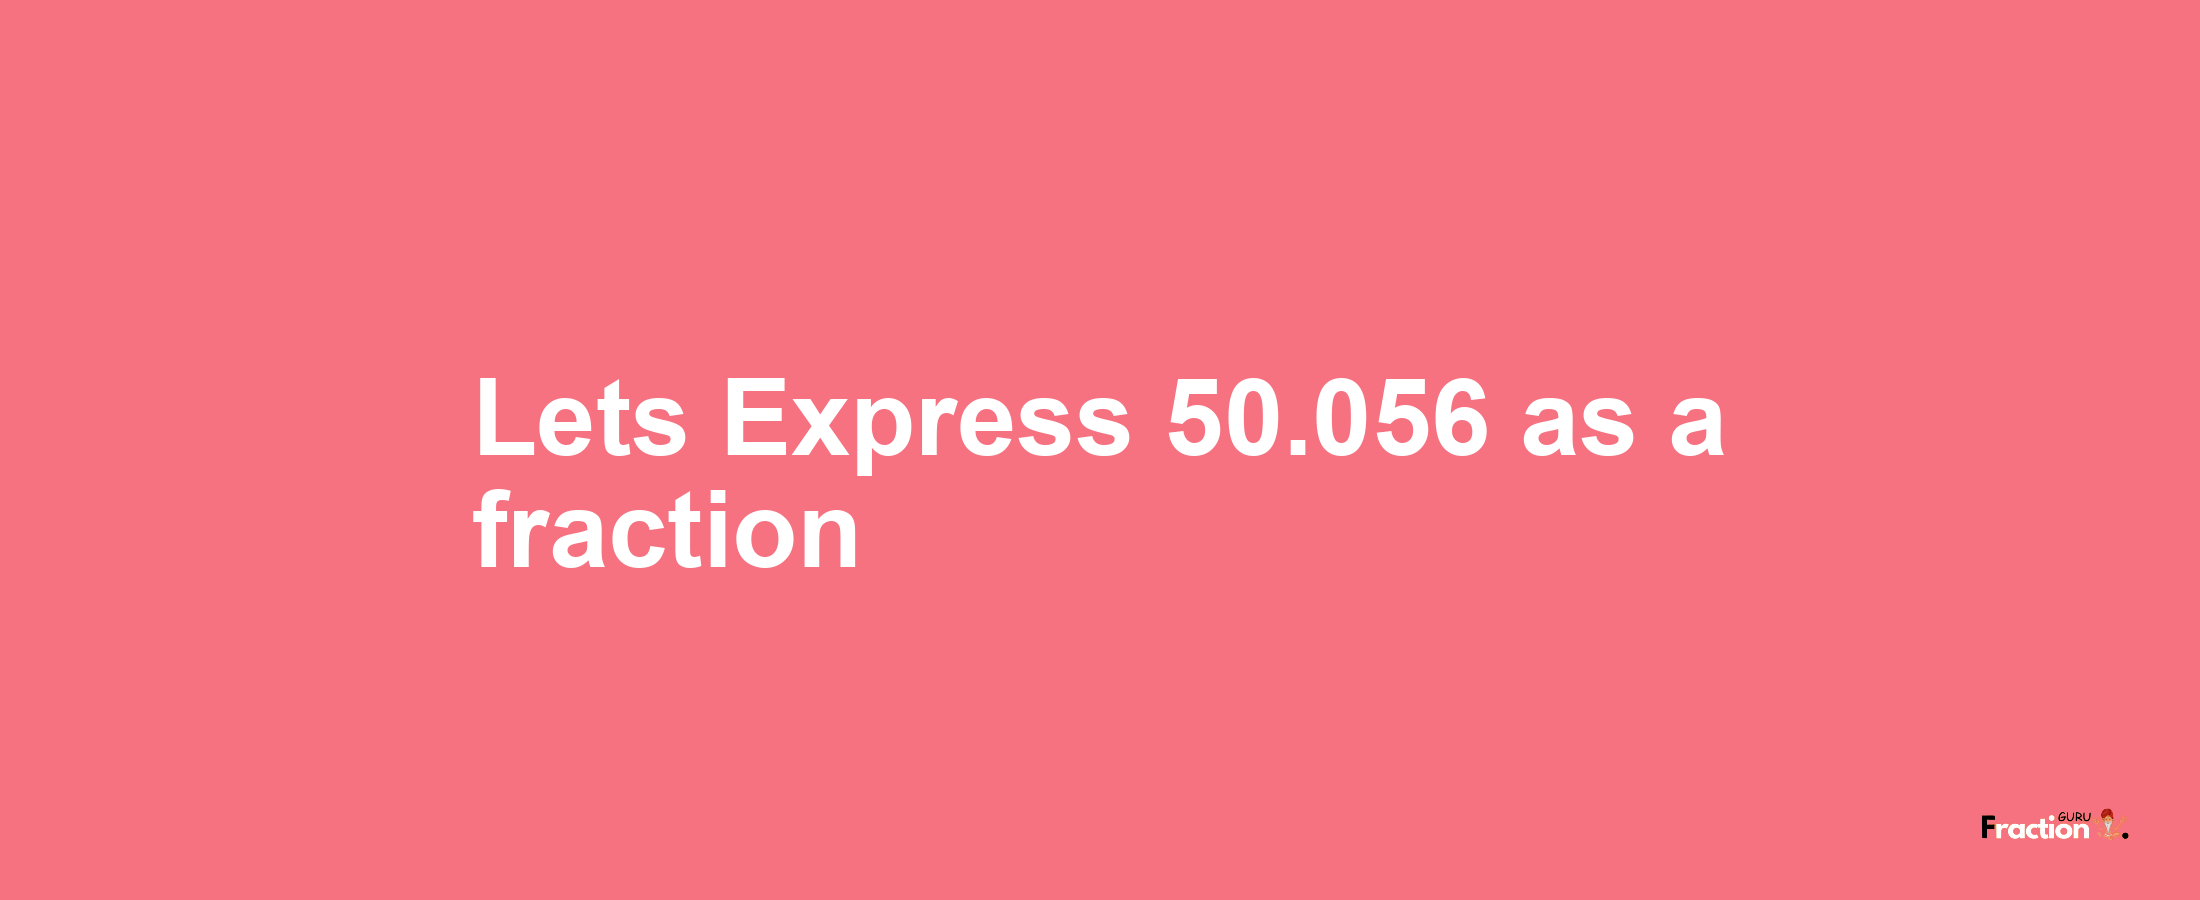 Lets Express 50.056 as afraction